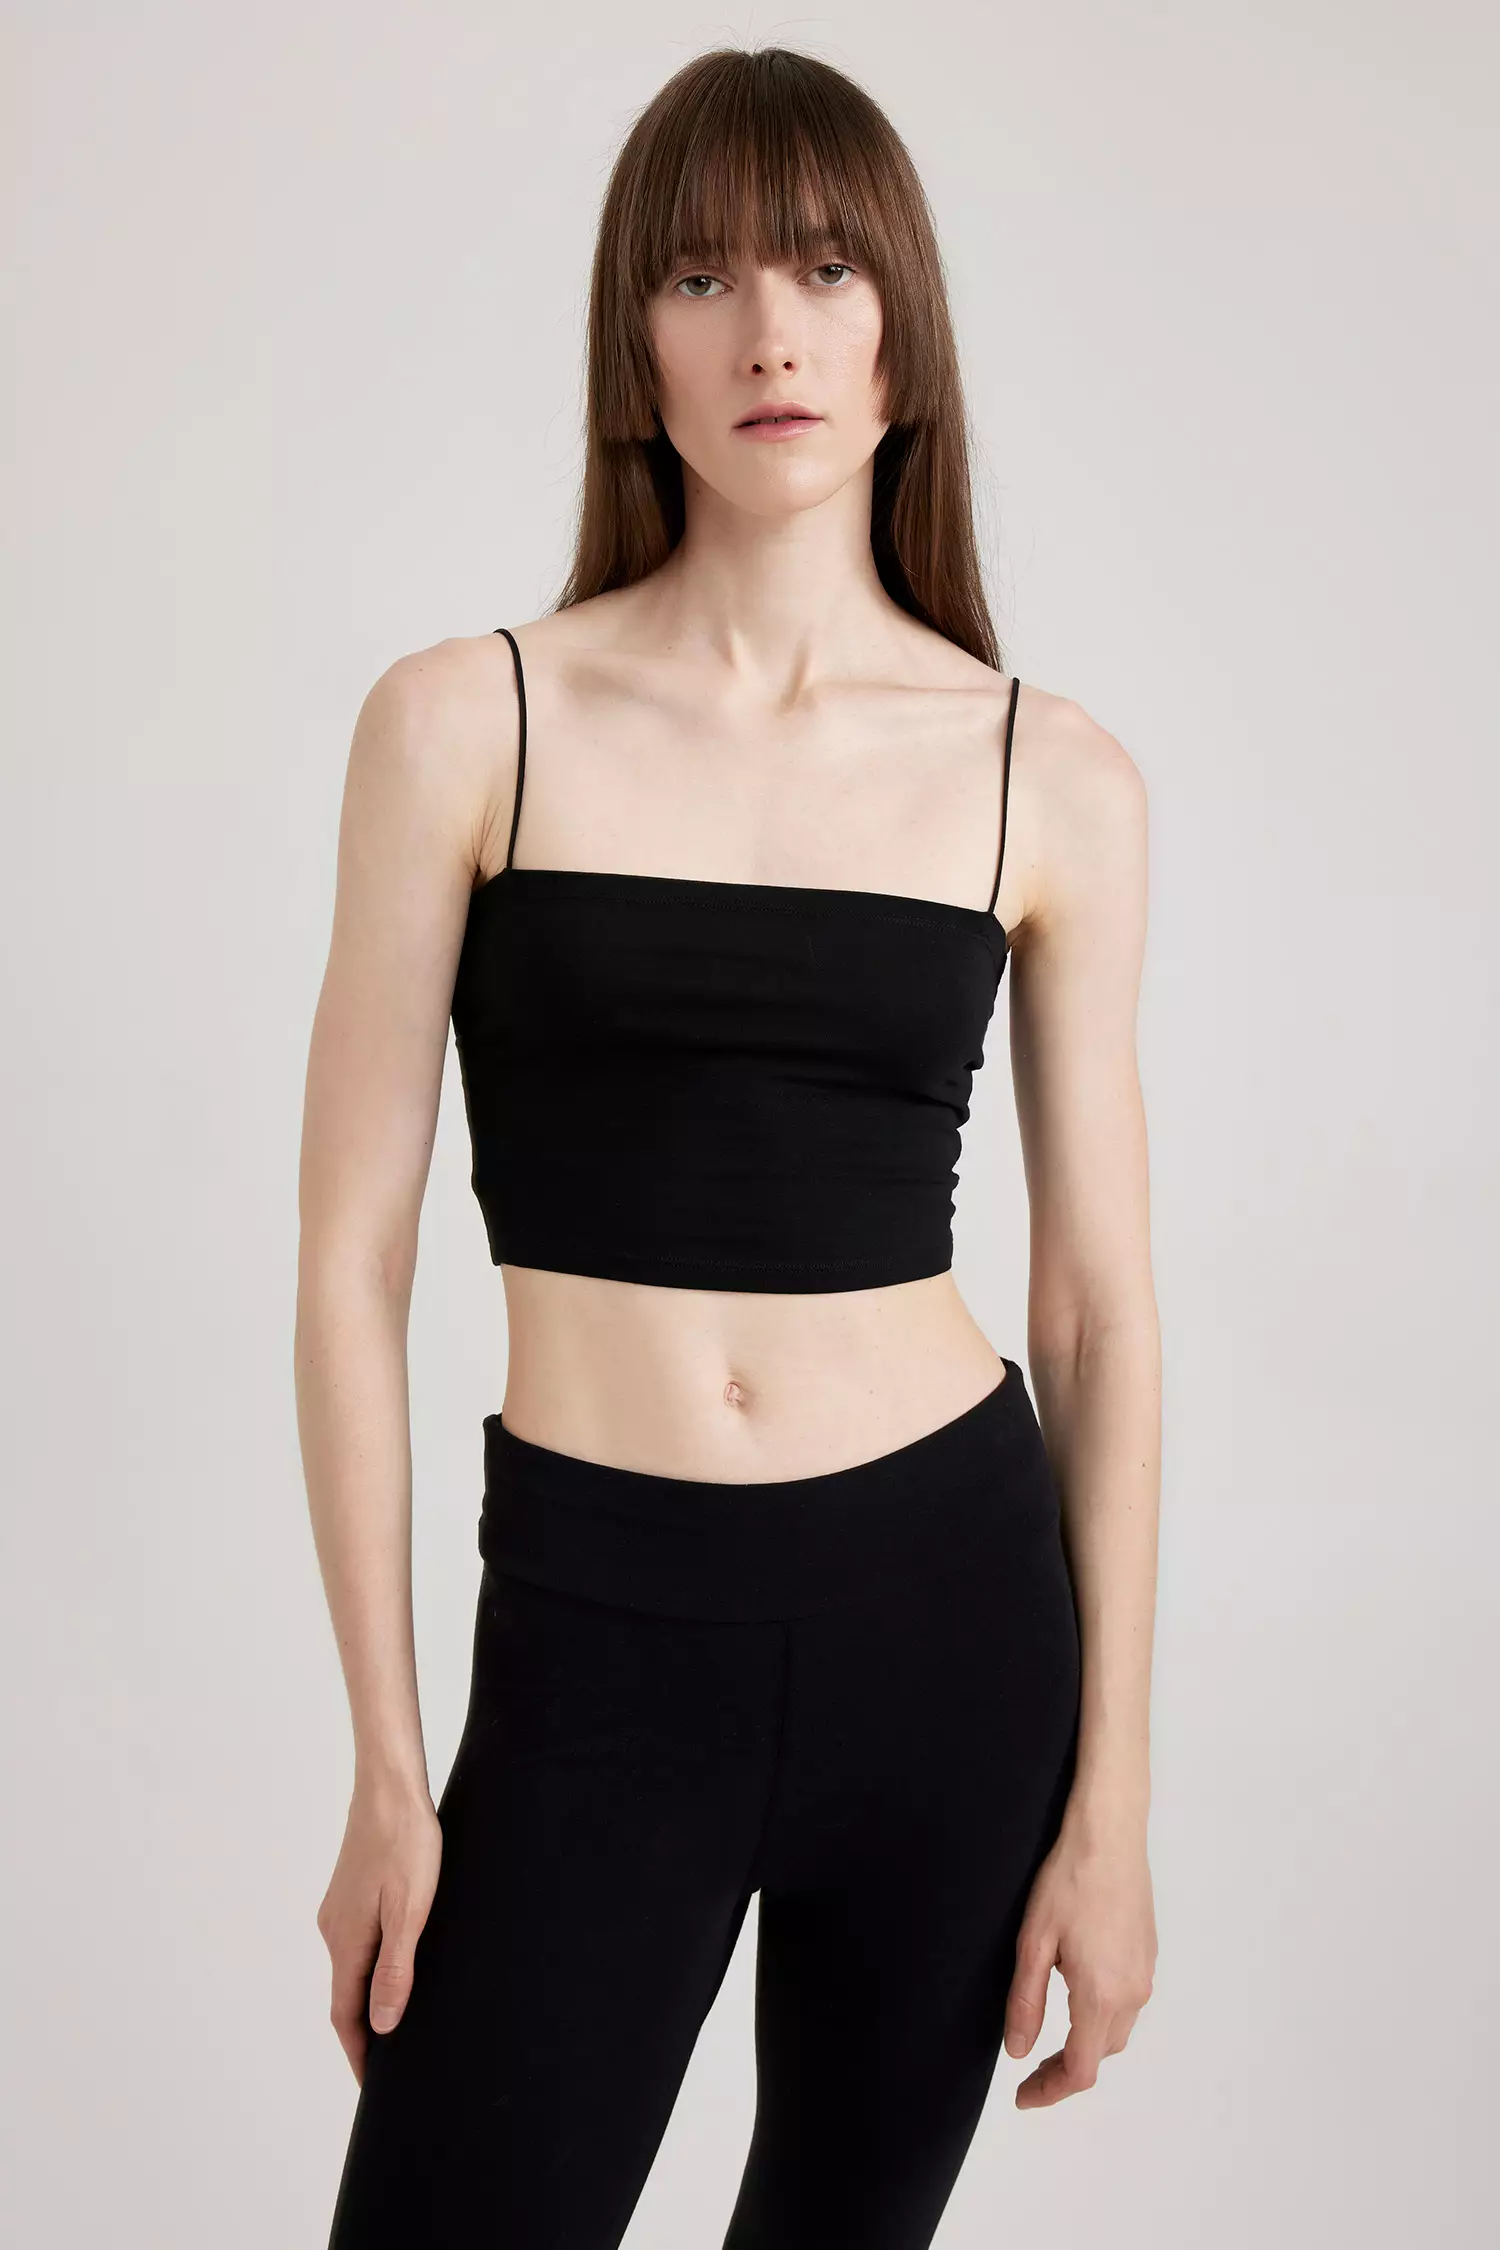 Strappy Lace Padded Bralette / Crop Top by Wishlist- Ginger - Miss